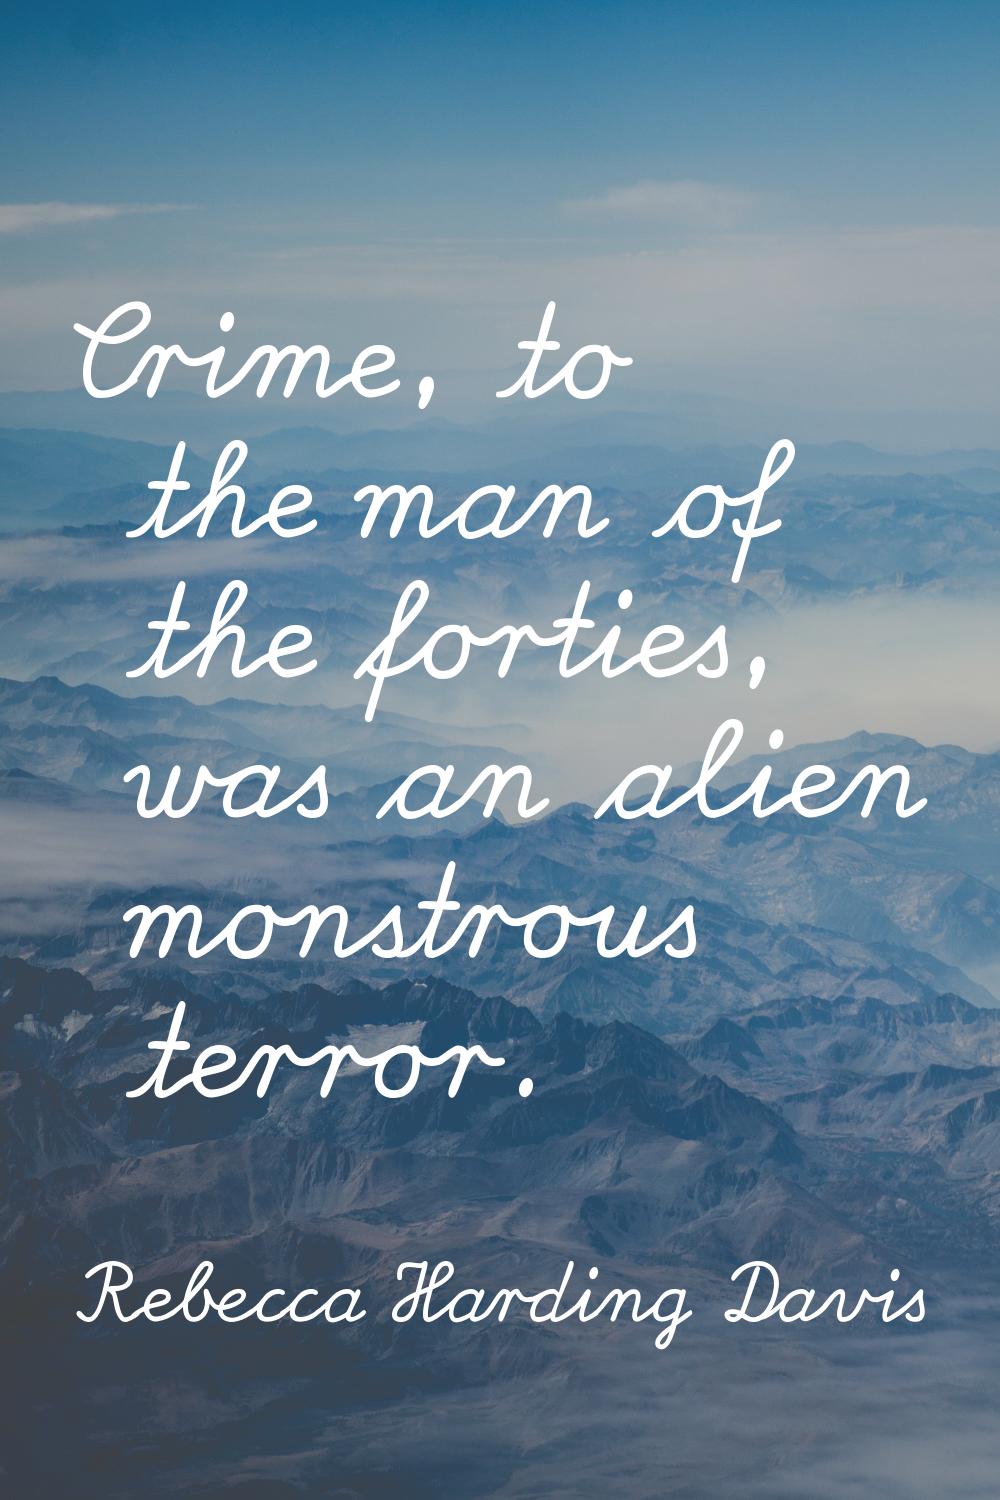 Crime, to the man of the forties, was an alien monstrous terror.